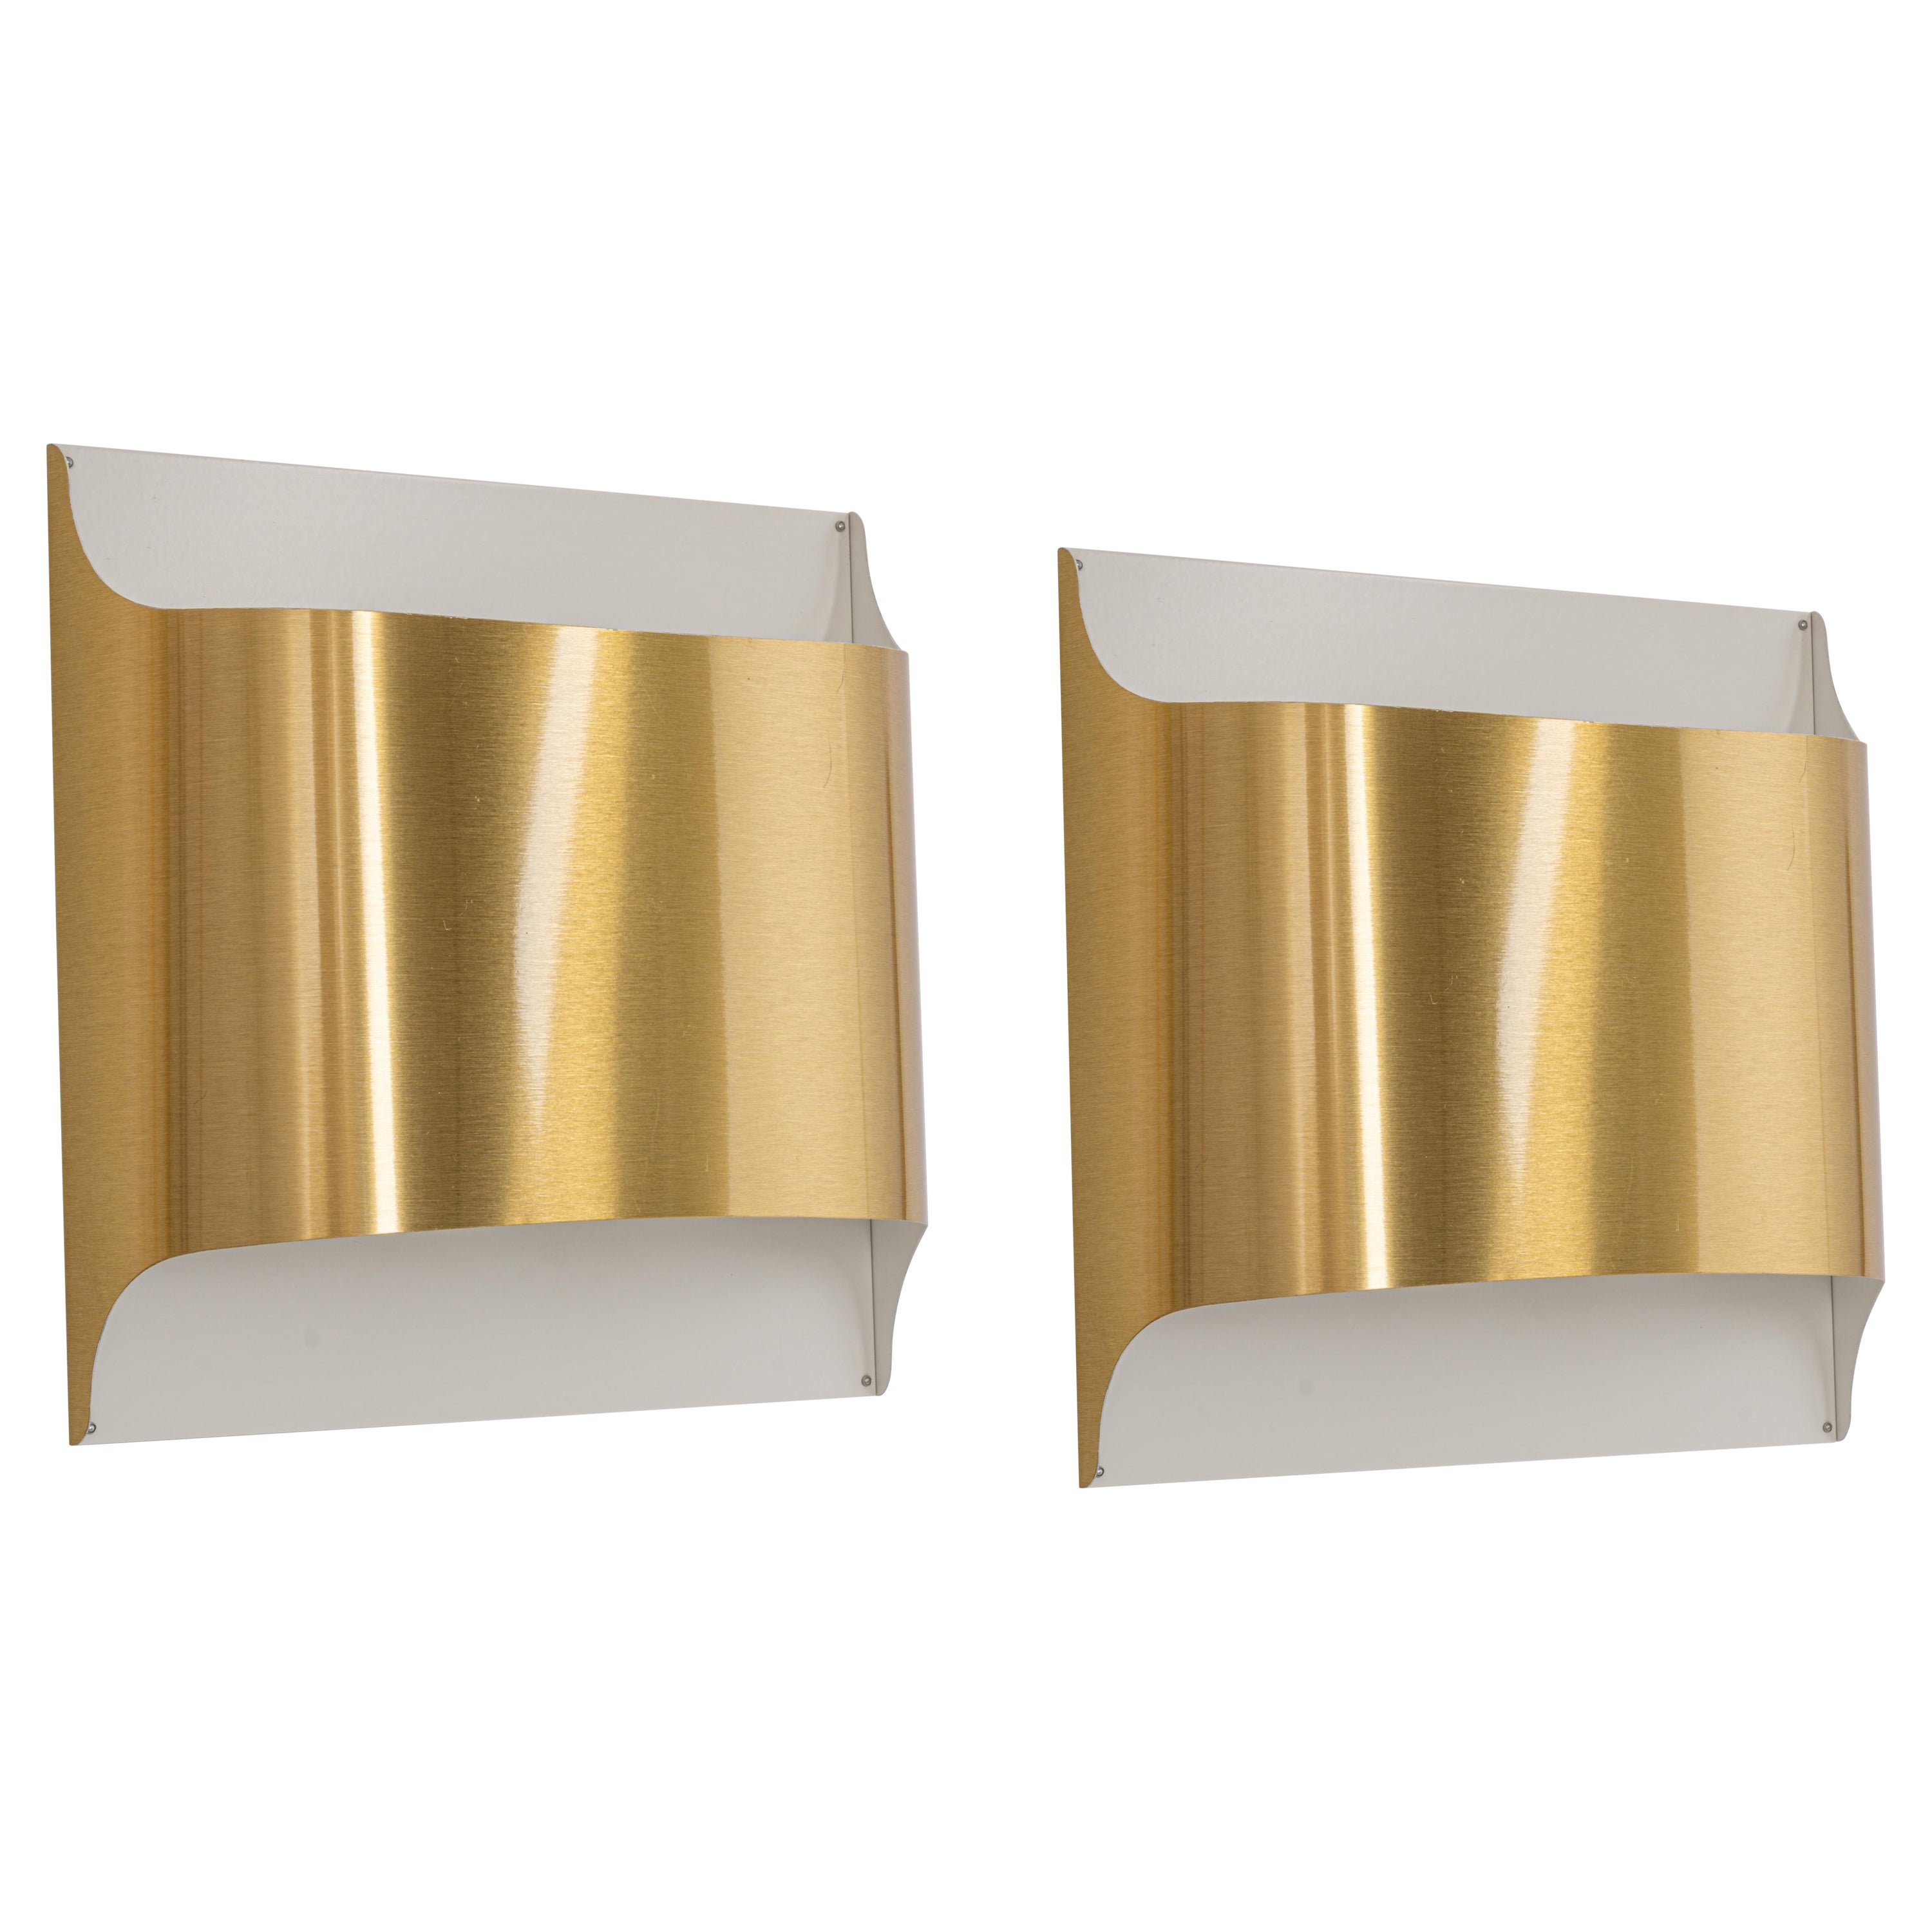 1 of 2 Wall Sconces Designed by Rolf Krüger for Staff, Germany, 1970s